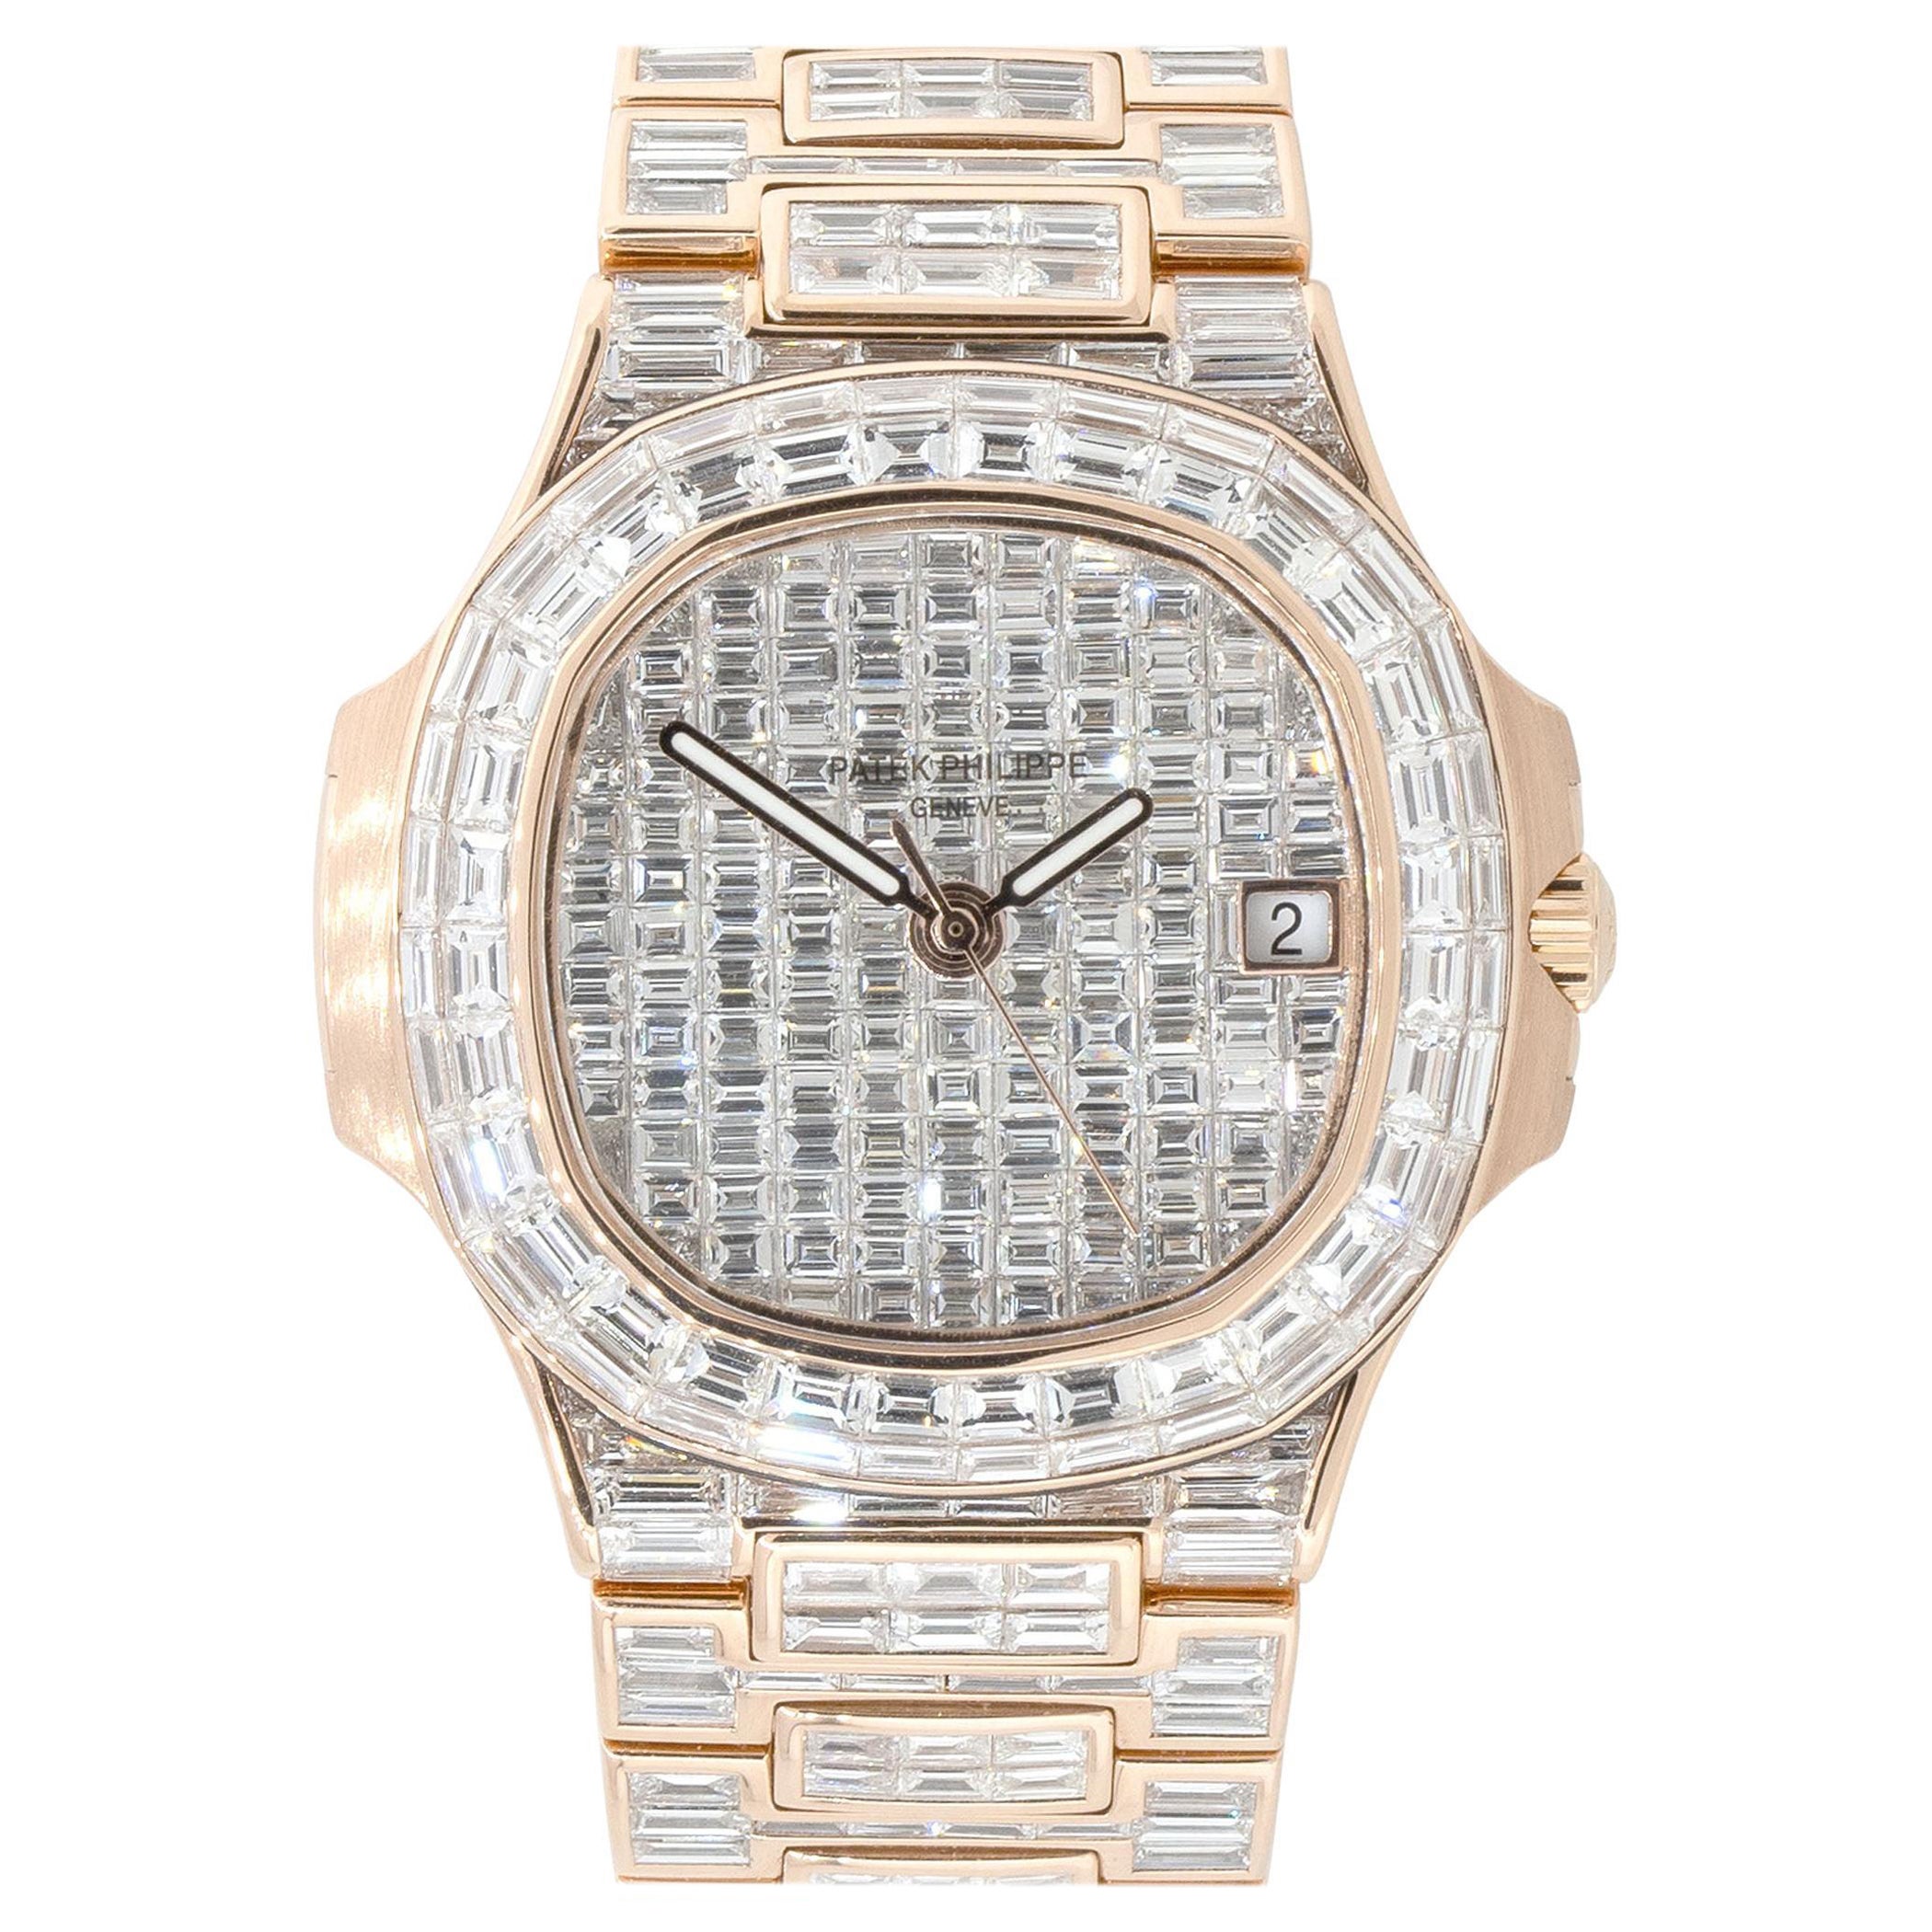 Patek Philippe Nautilus 18k Rose Gold All Baguette Diamond Watch In Stock For Sale